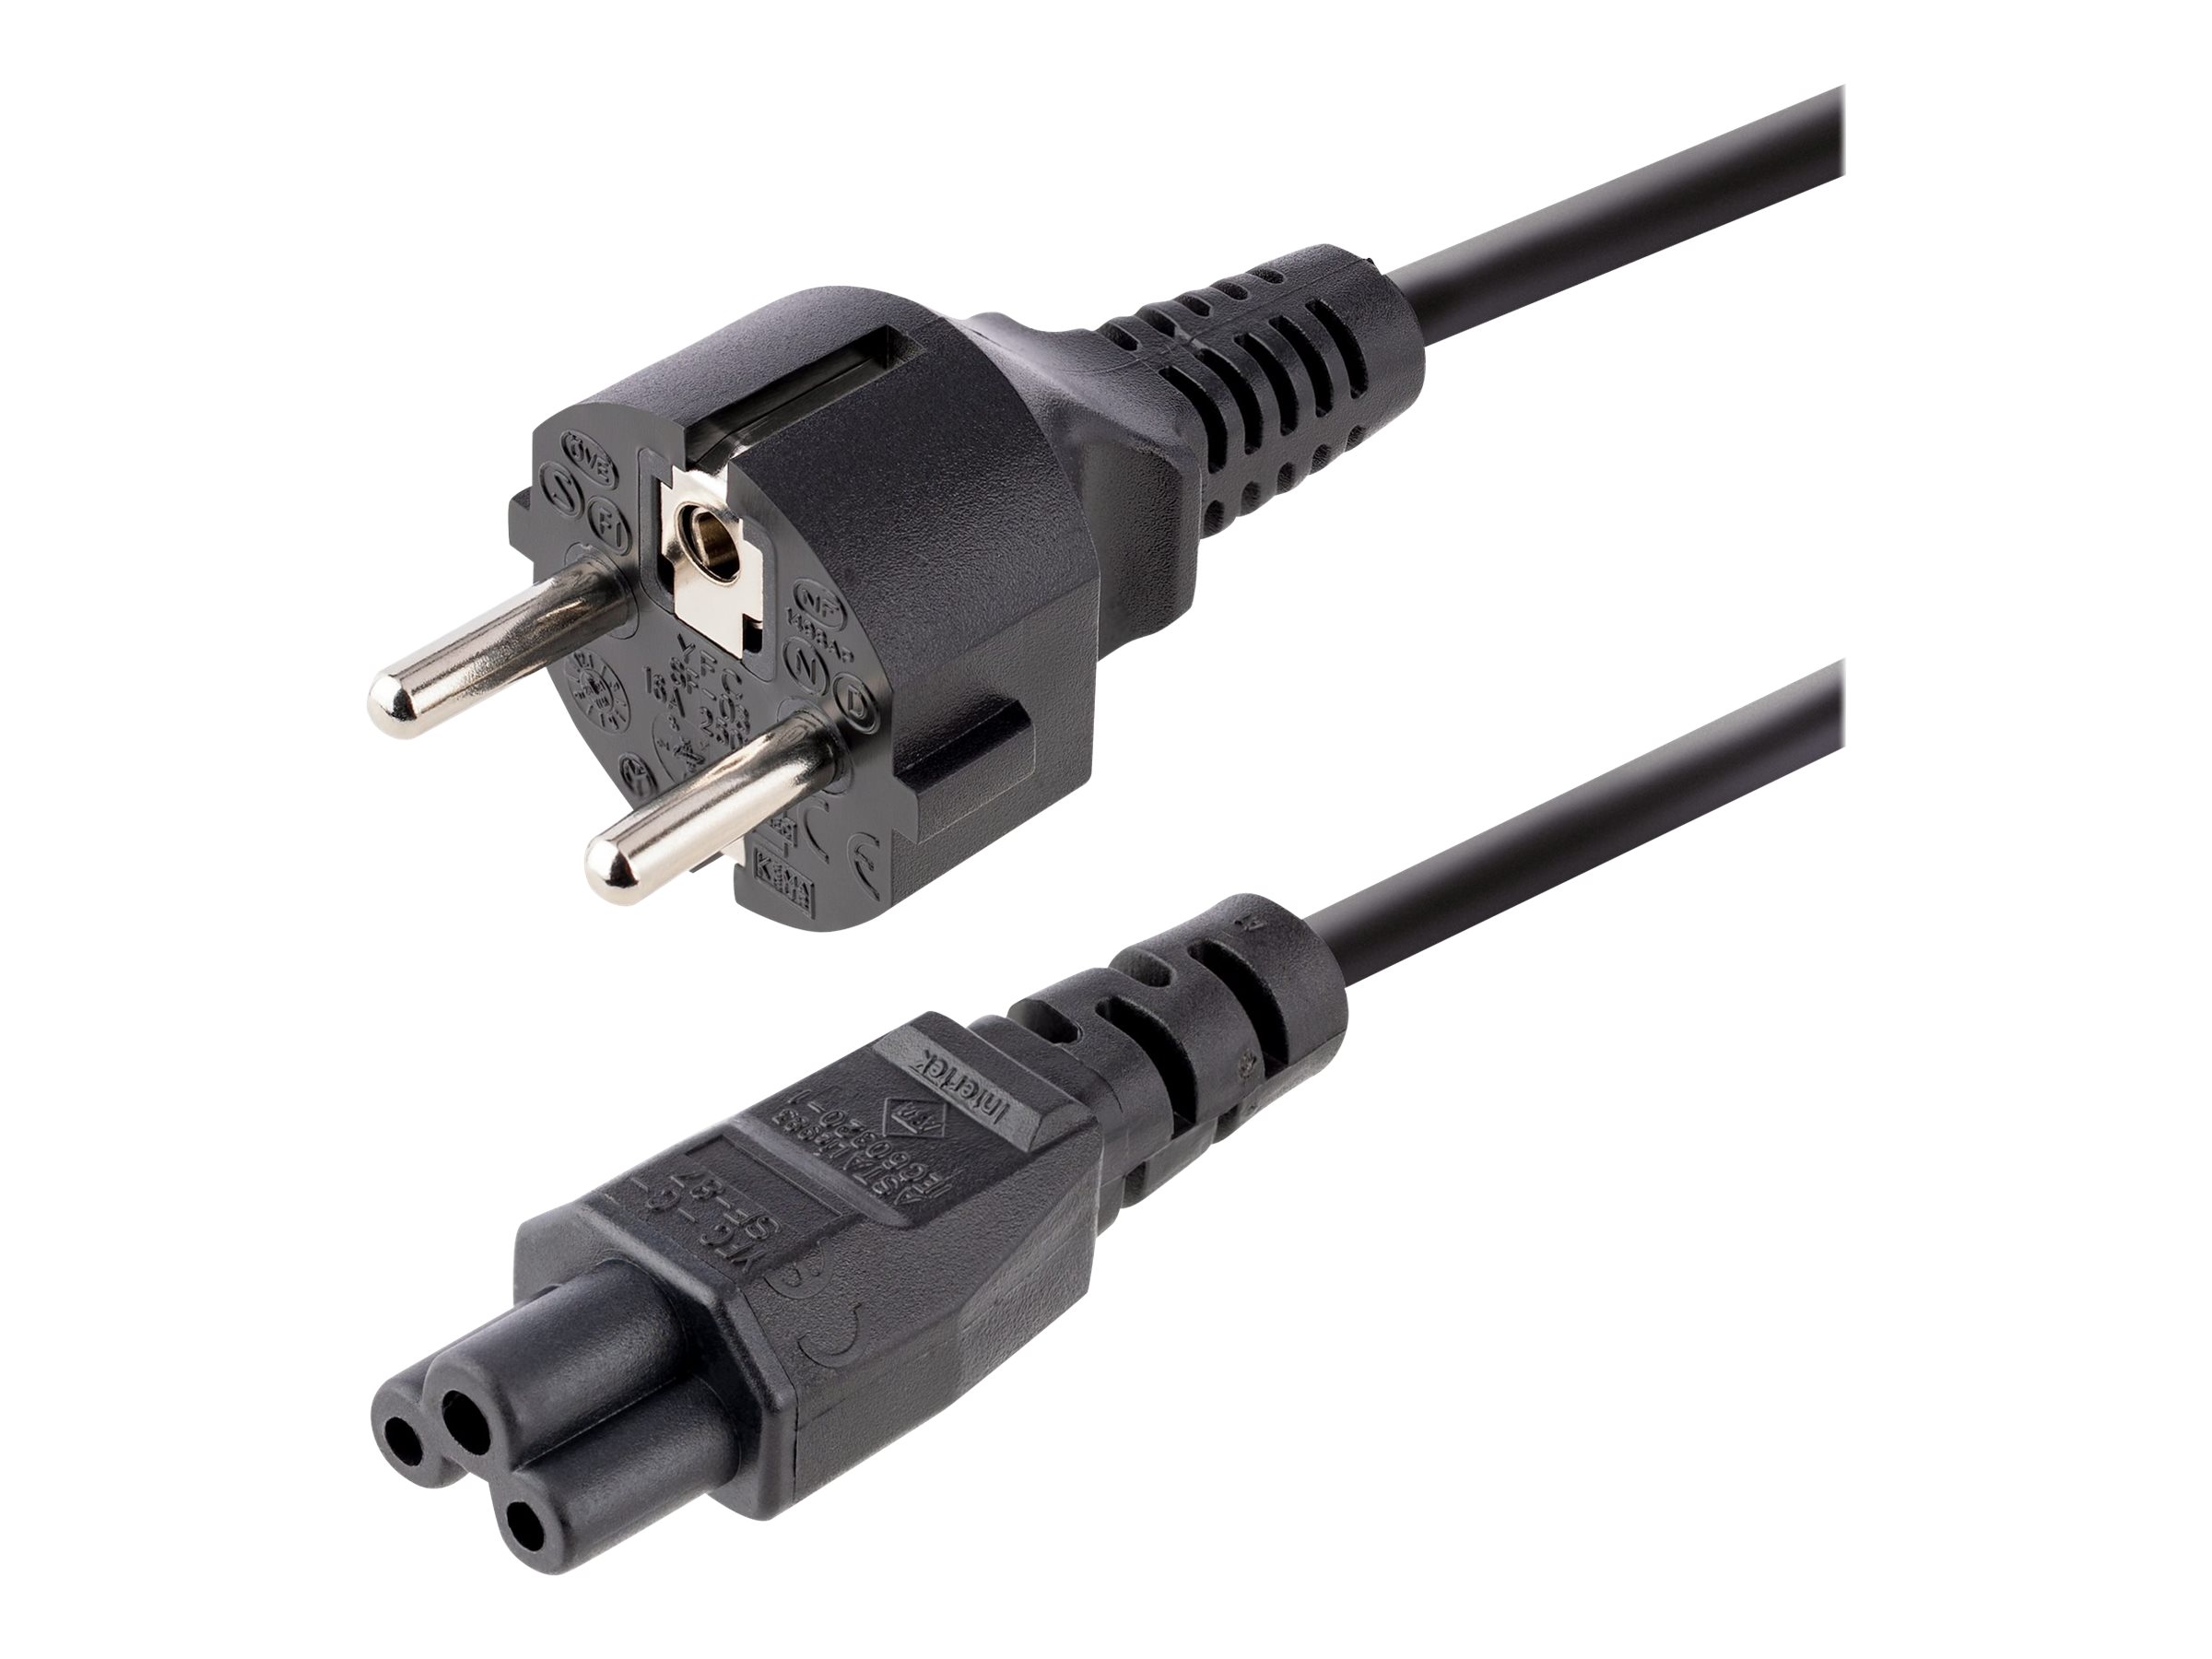 StarTech.com 3m (10ft) Laptop Power Cord, EU Schuko to C5, 2.5A 250V, 18AWG, Notebook / Laptop Replacement AC Cord, Printer/Power Brick Cord, Schuko CEE 7/7 to Clover Leaf IEC 60320 C5 - Laptop Charger Cable (753E-3M-POWER-LEAD) - Câble d'alimentation - power CEE 7/7 (P) pour IEC 60320 C5 - CA 250 V - 2.5 A - 3 m - moulé - noir - 753E-3M-POWER-LEAD - Câbles d'alimentation